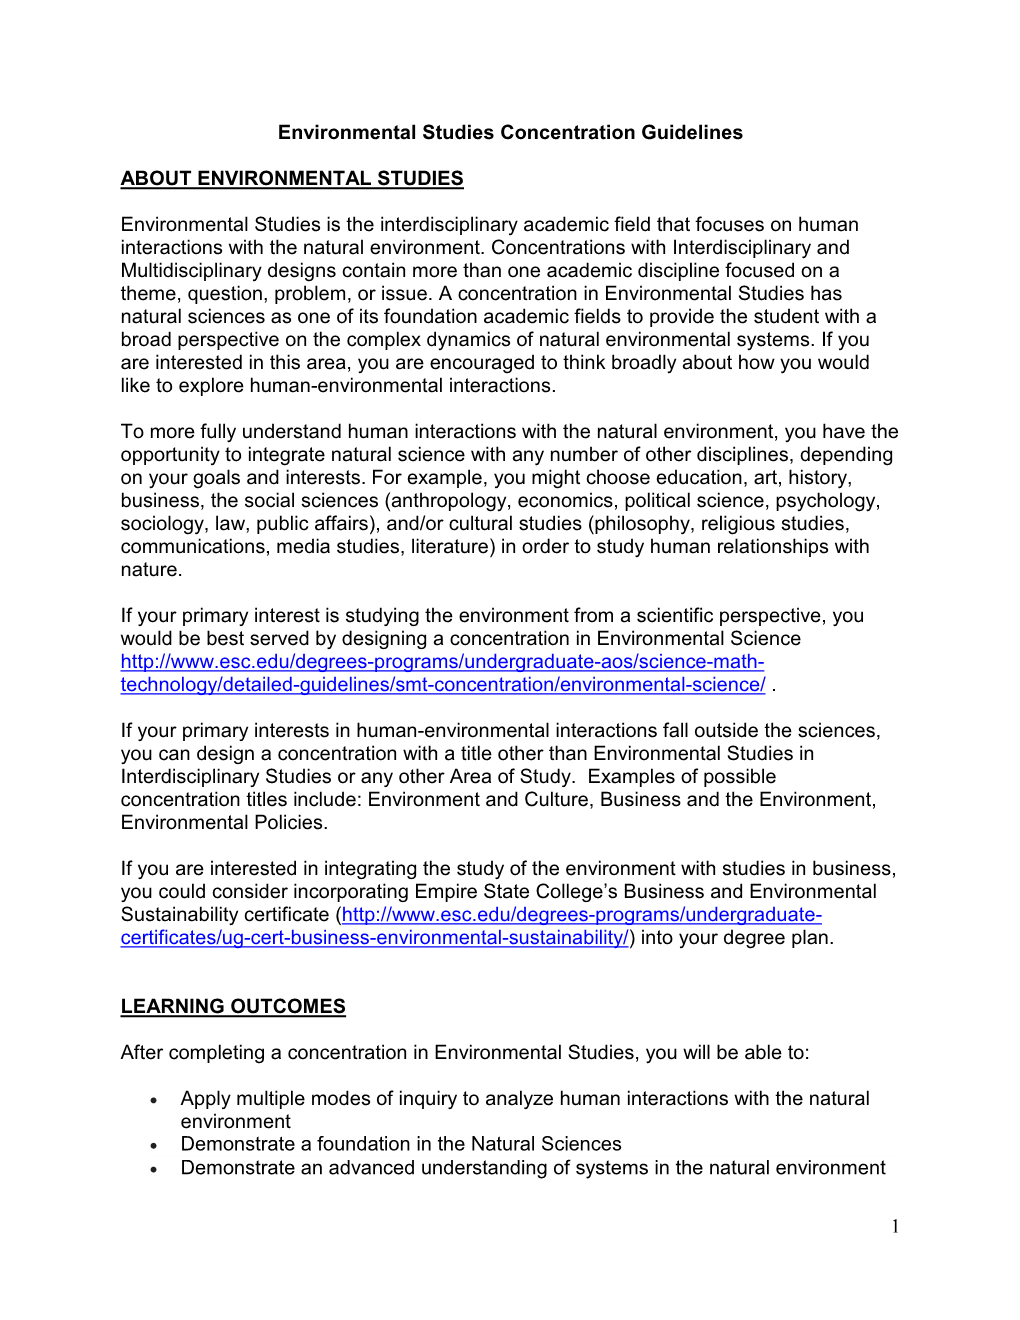 1 Environmental Studies Concentration Guidelines ABOUT